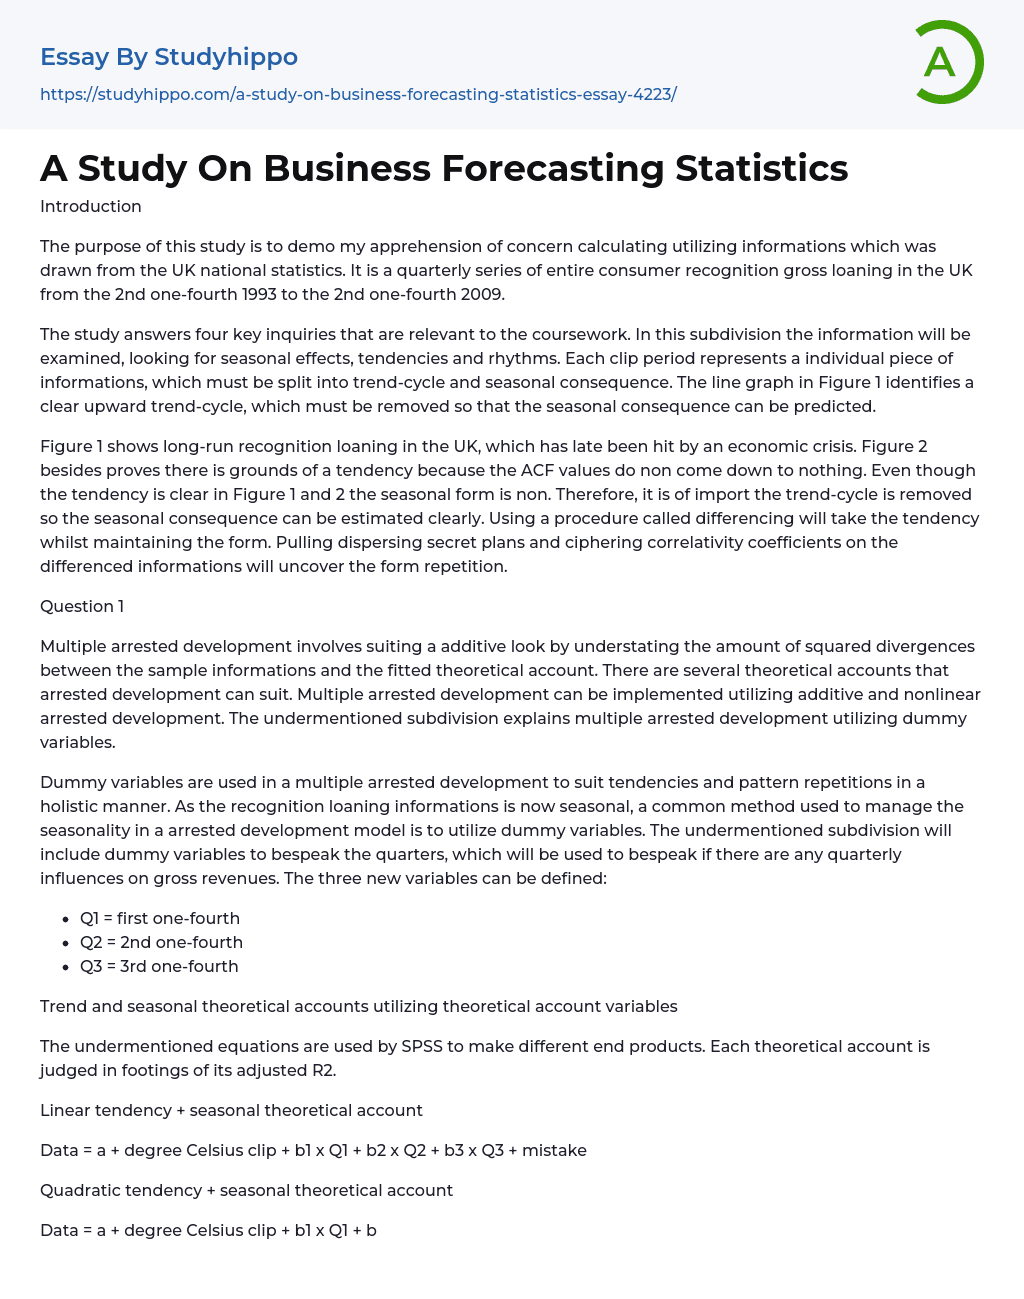 A Study On Business Forecasting Statistics Essay Example